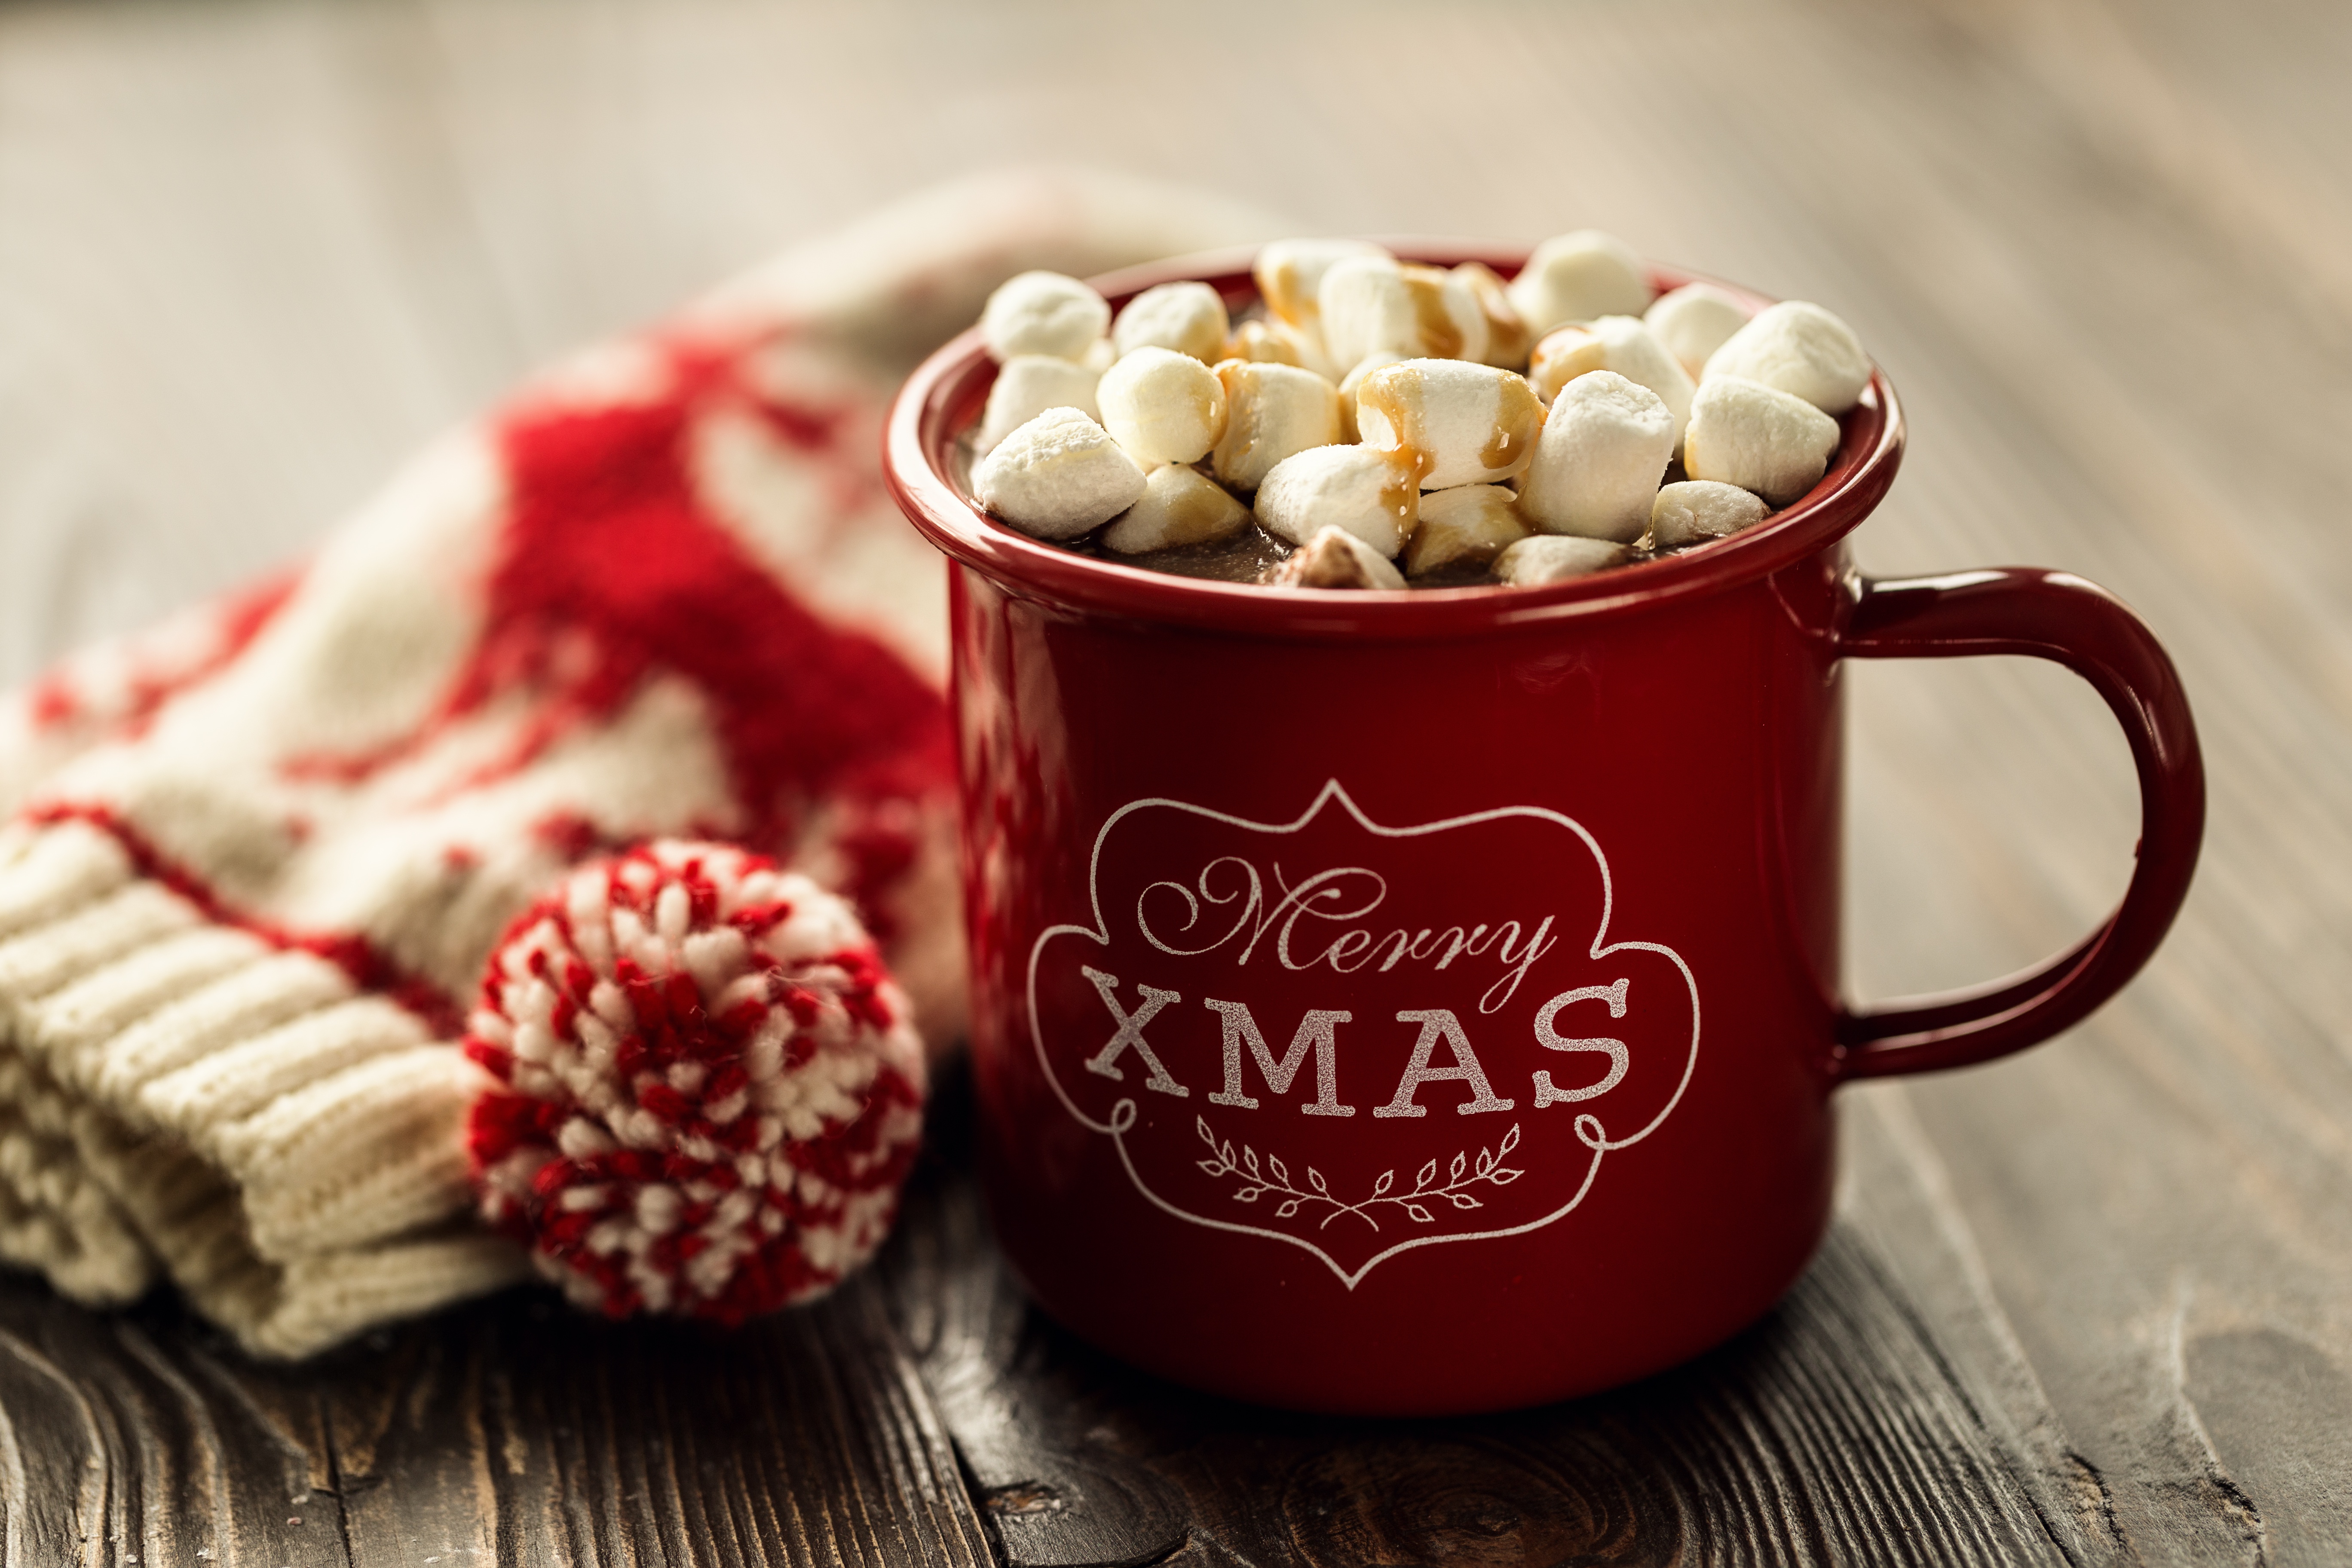 Marshmallow Cup Merry Christmas 5472x3648